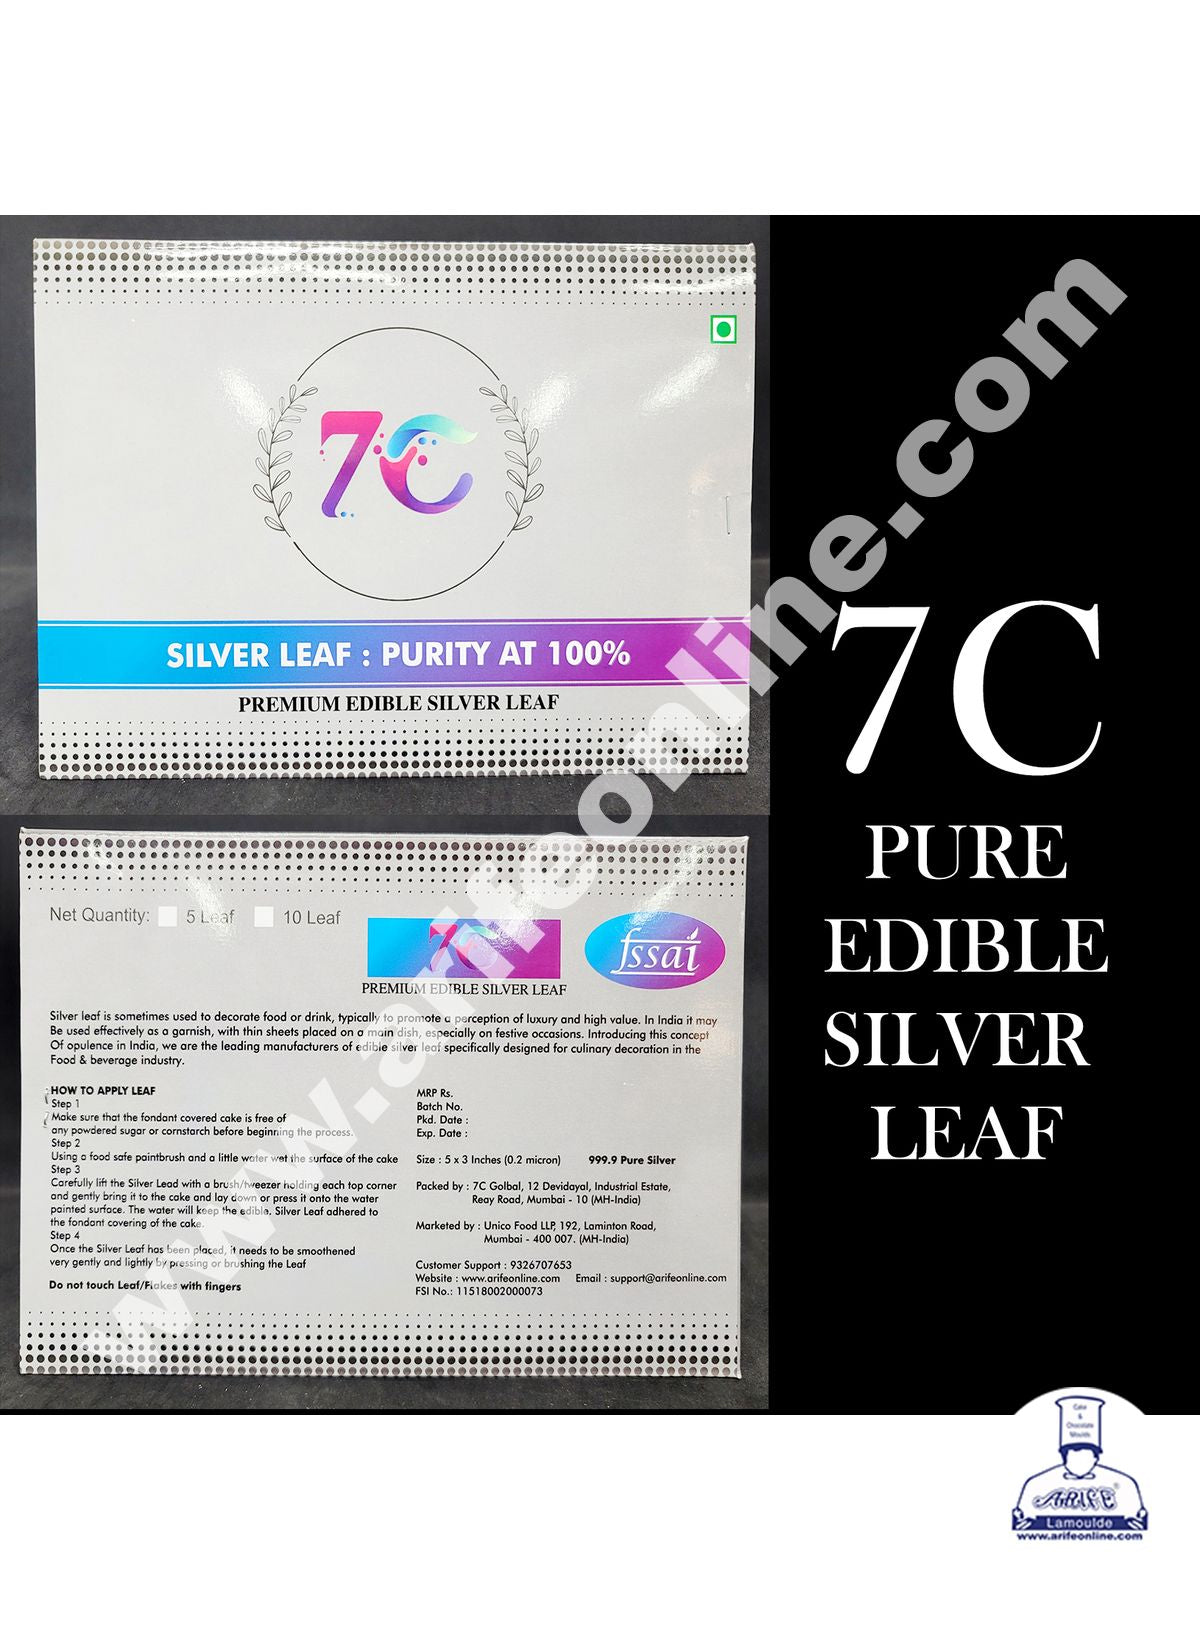 Silver Leaf - Edible - 5 Pack - Cake Decorating Solutions